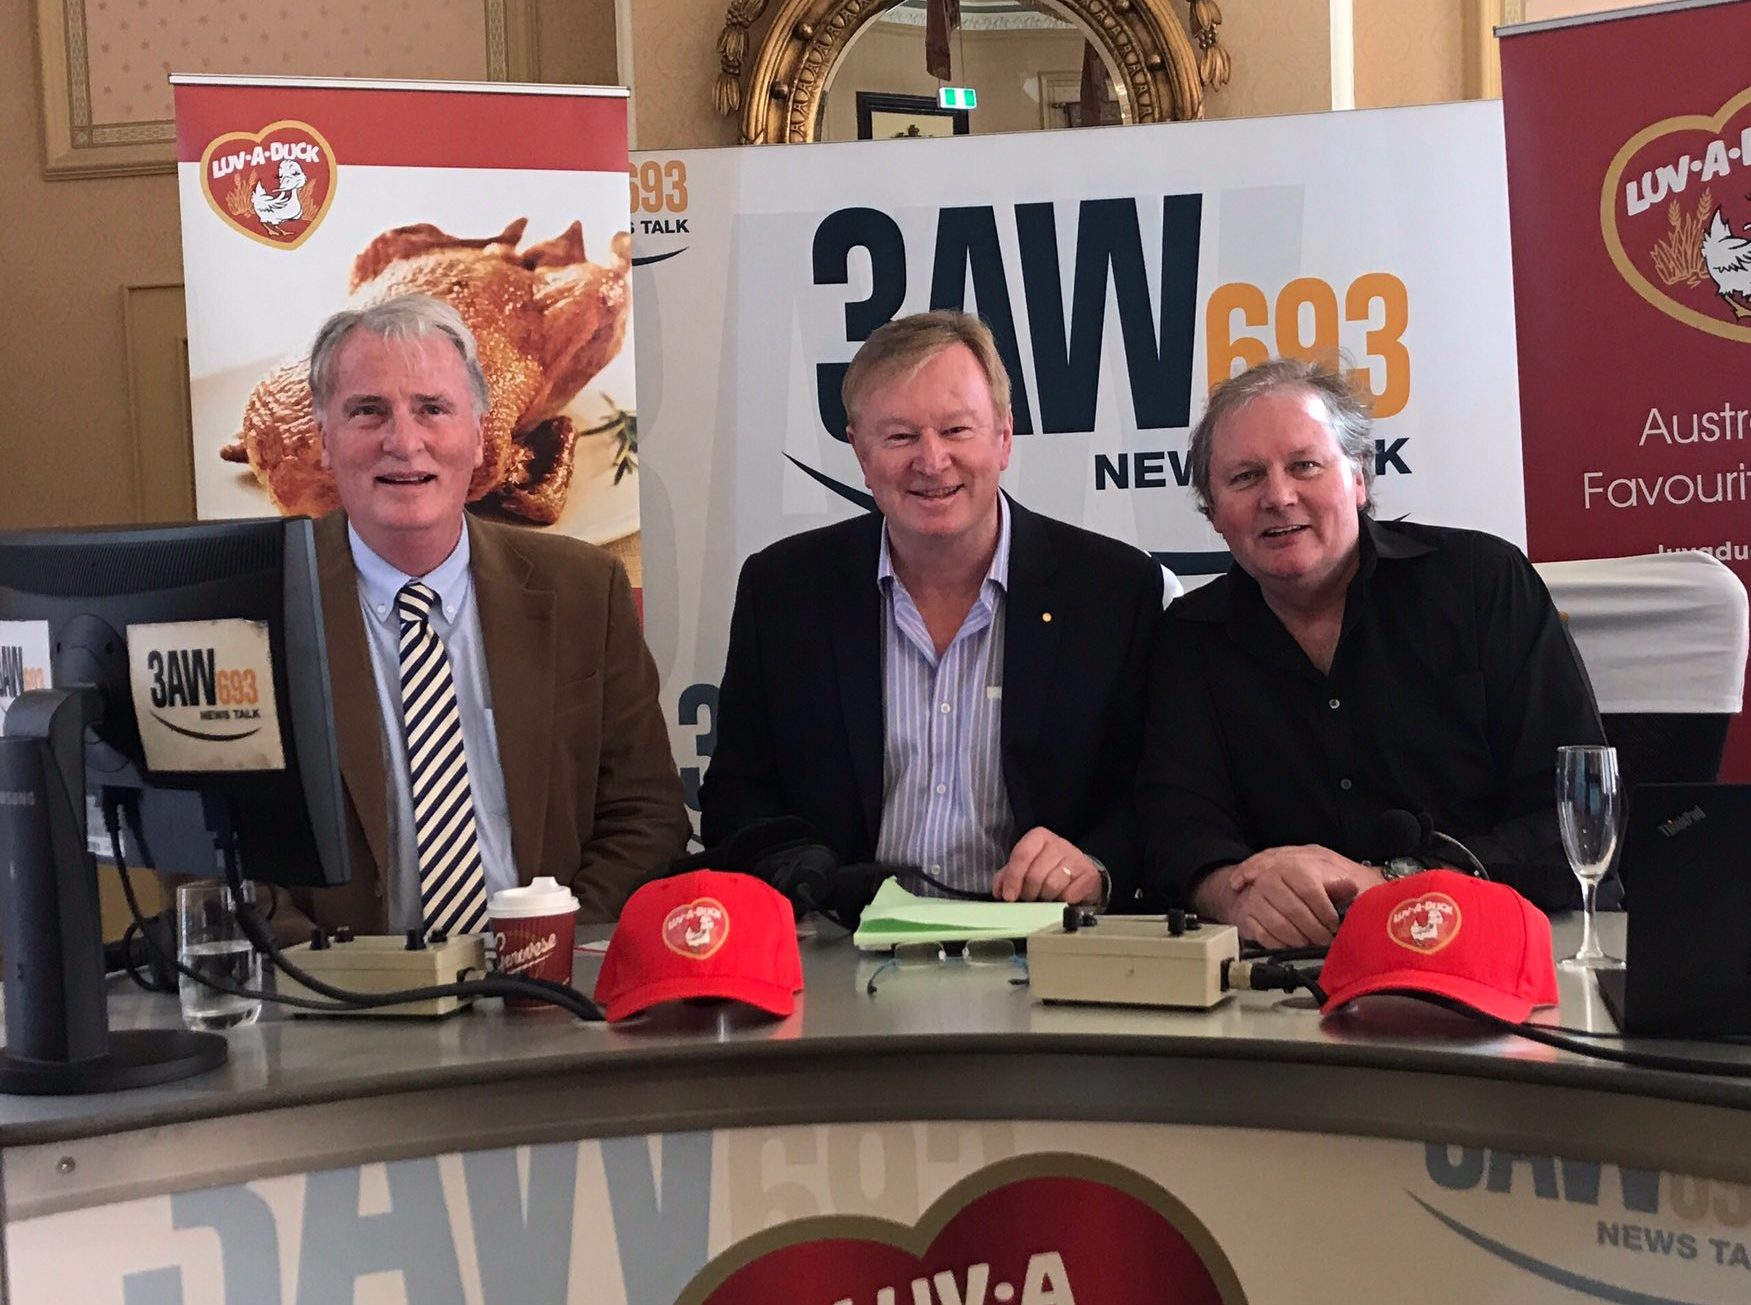 Article image for 3AW Afternoons with Denis Walter – LIVE from Craig’s Royal Hotel for Luv-a-Duck!